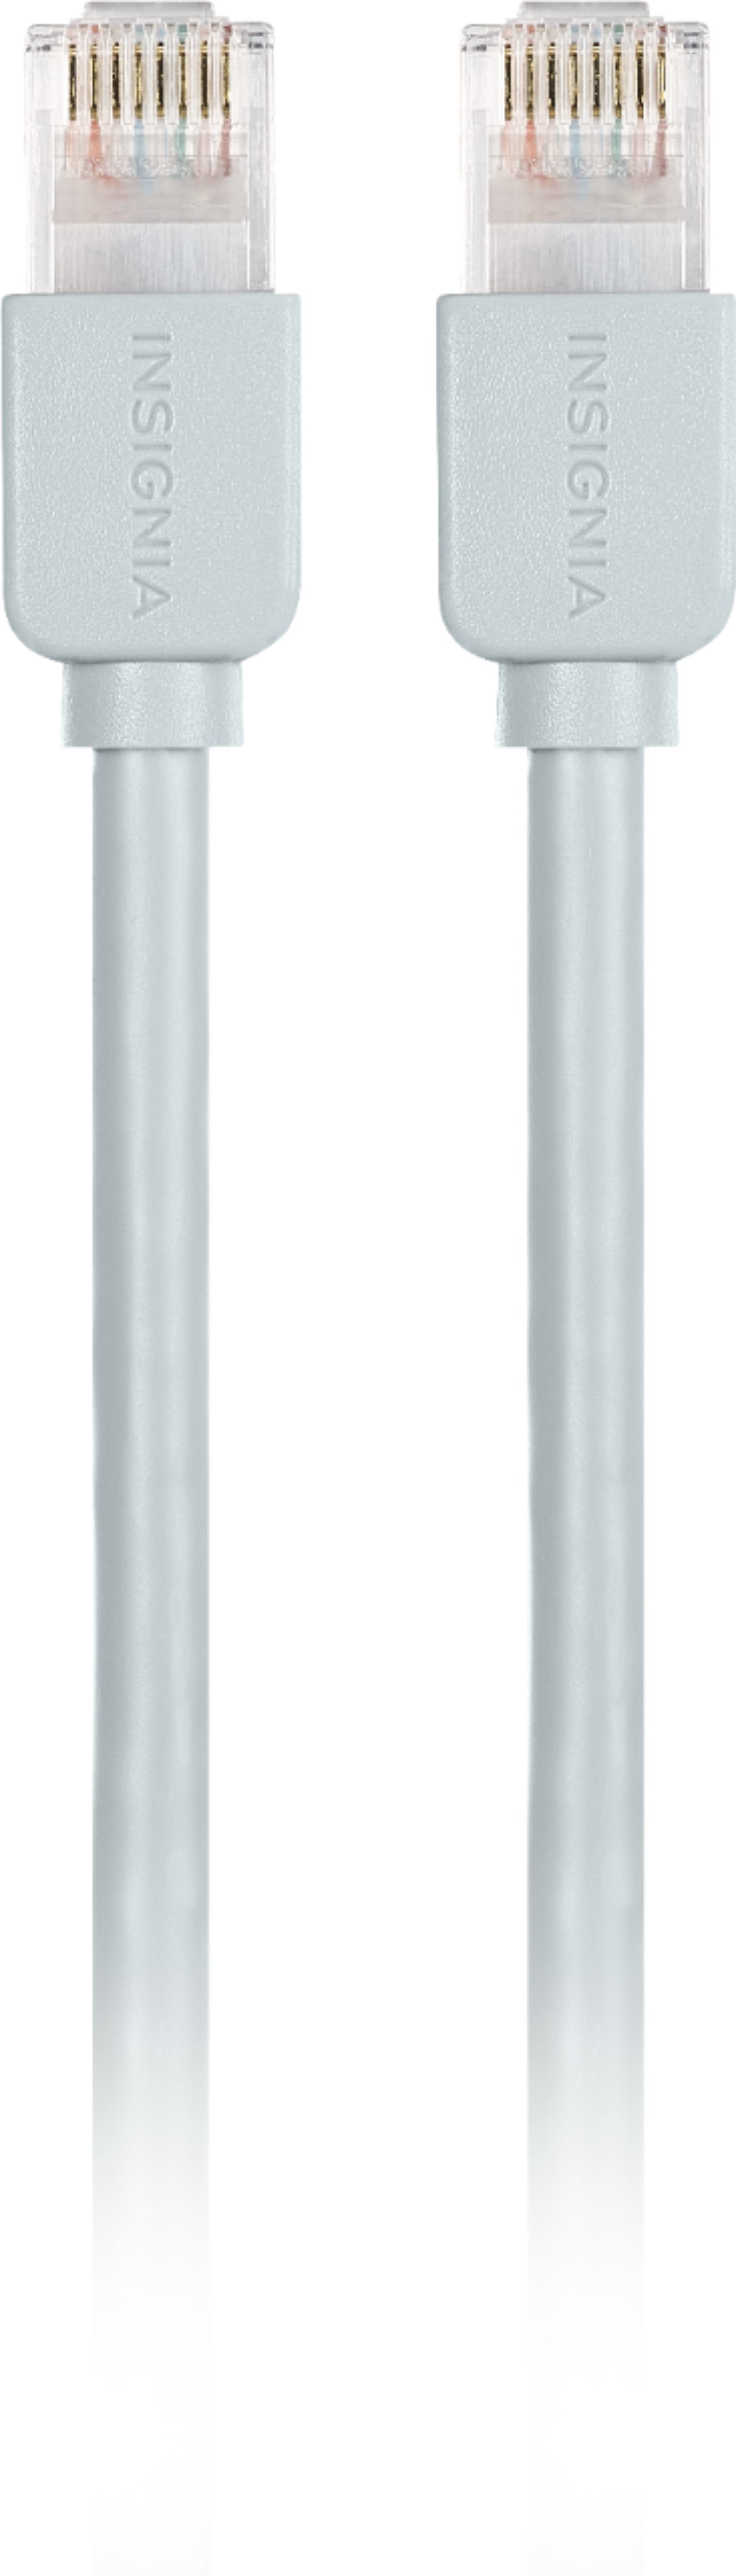 Angle View: Insignia™ - 25 foot Cat-6 Ethernet Cable - Gray